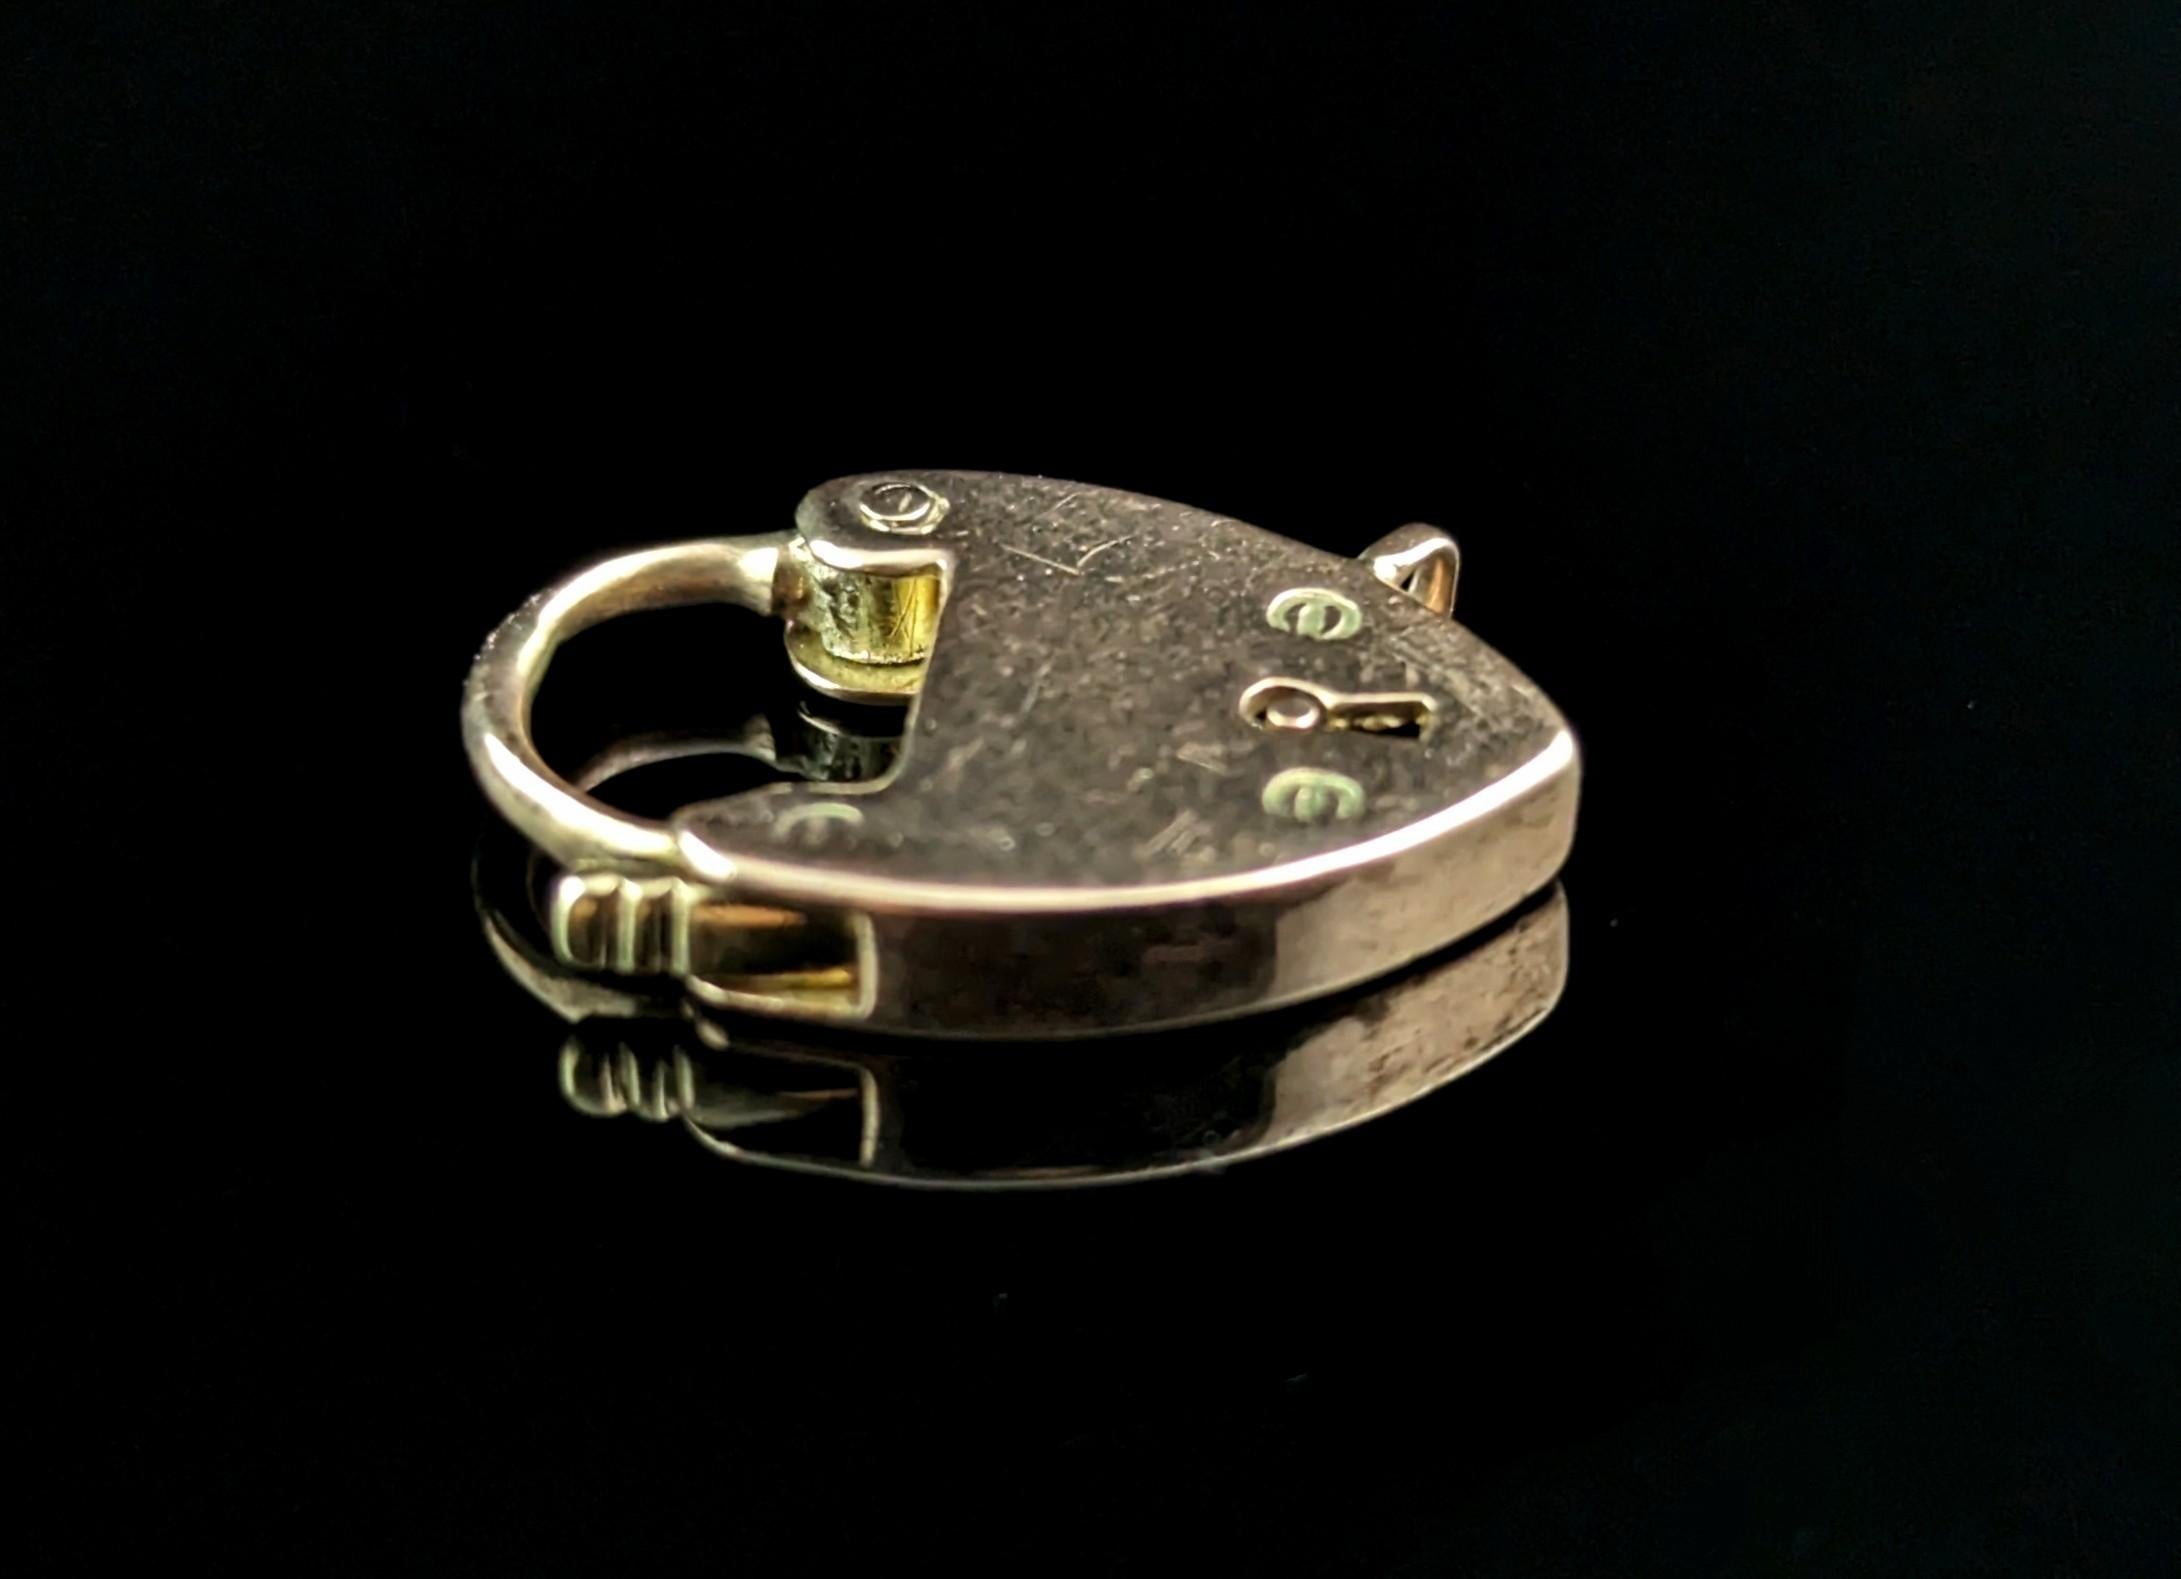  versatile little antique 9ct gold heart padlock clasp.

Originally a bracelet clasp and it could still be used for a bracelet if you are looking for a nice antique clasp.

These pieces also work well as tiny pendants and charms.

It is a heart